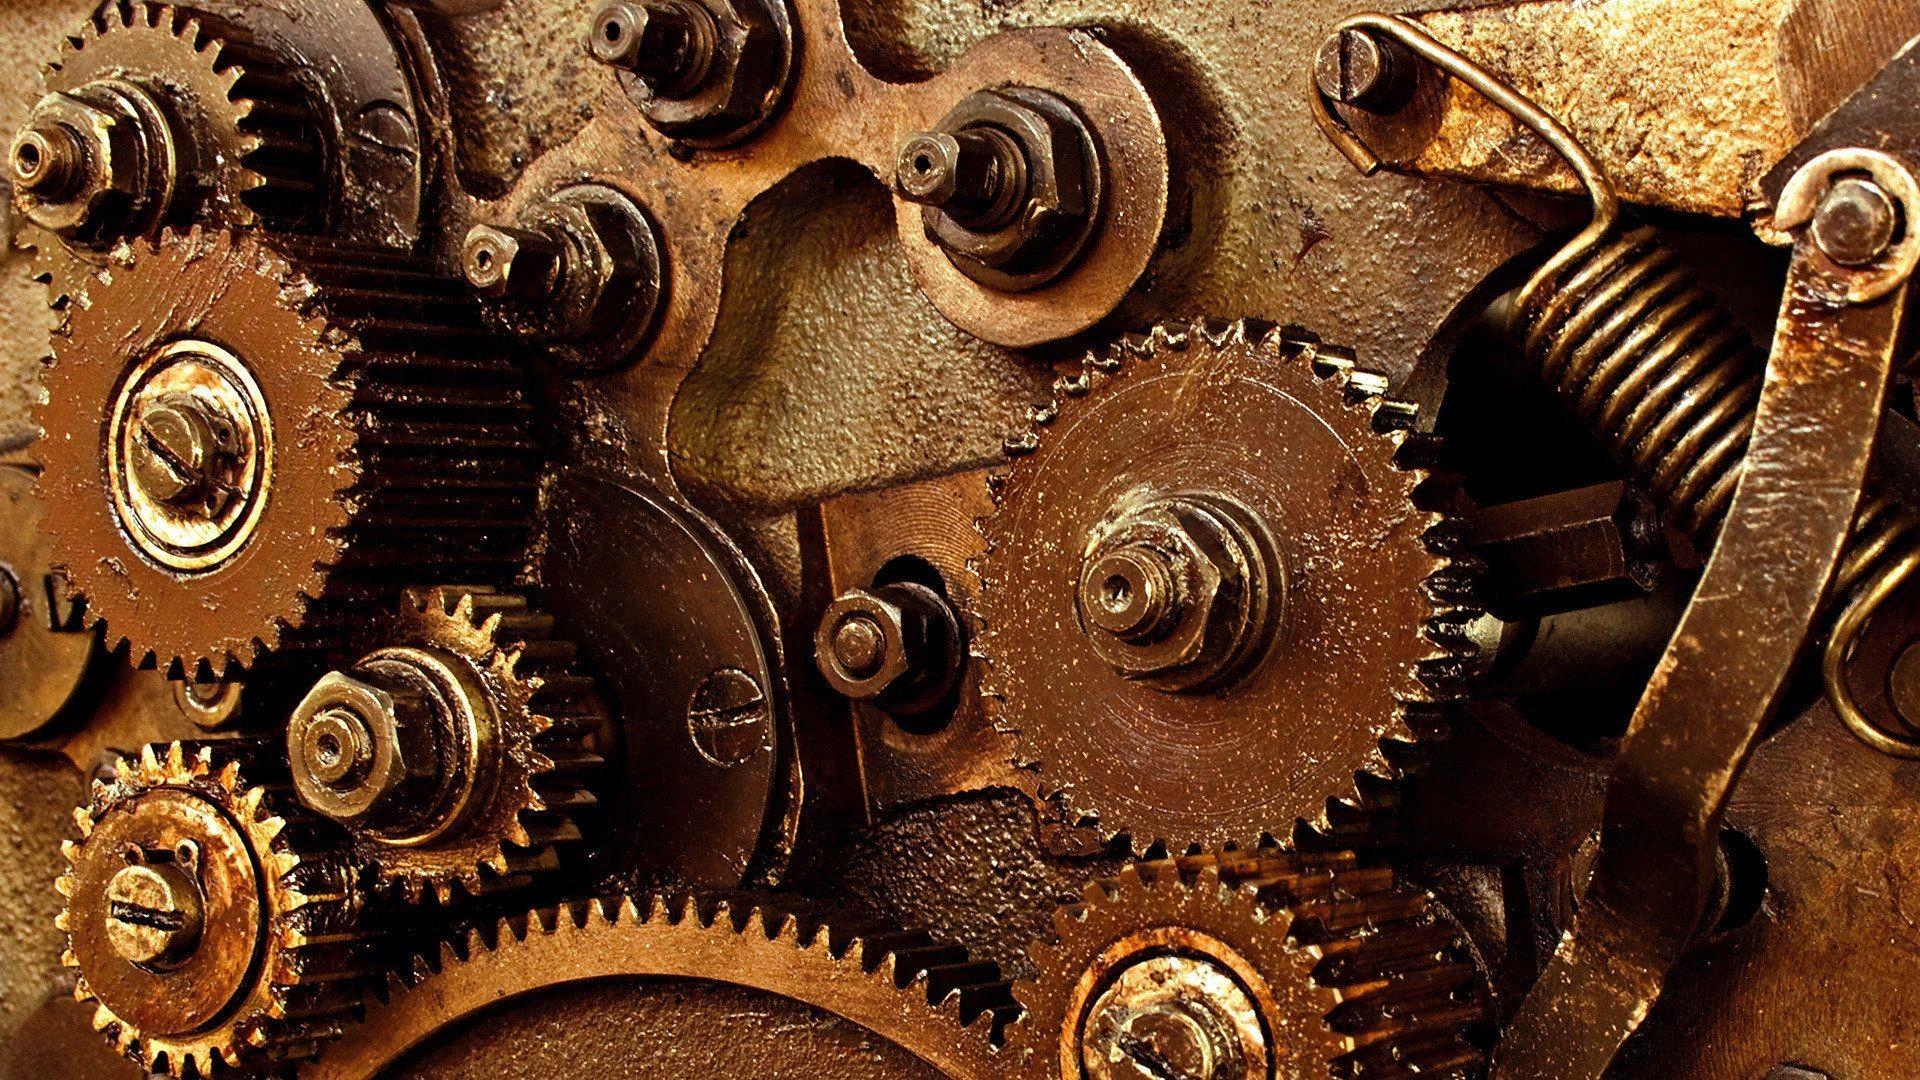 HD wallpaper: steampunk, old, gears, metal, machinery, connection, machine  part | Wallpaper Flare